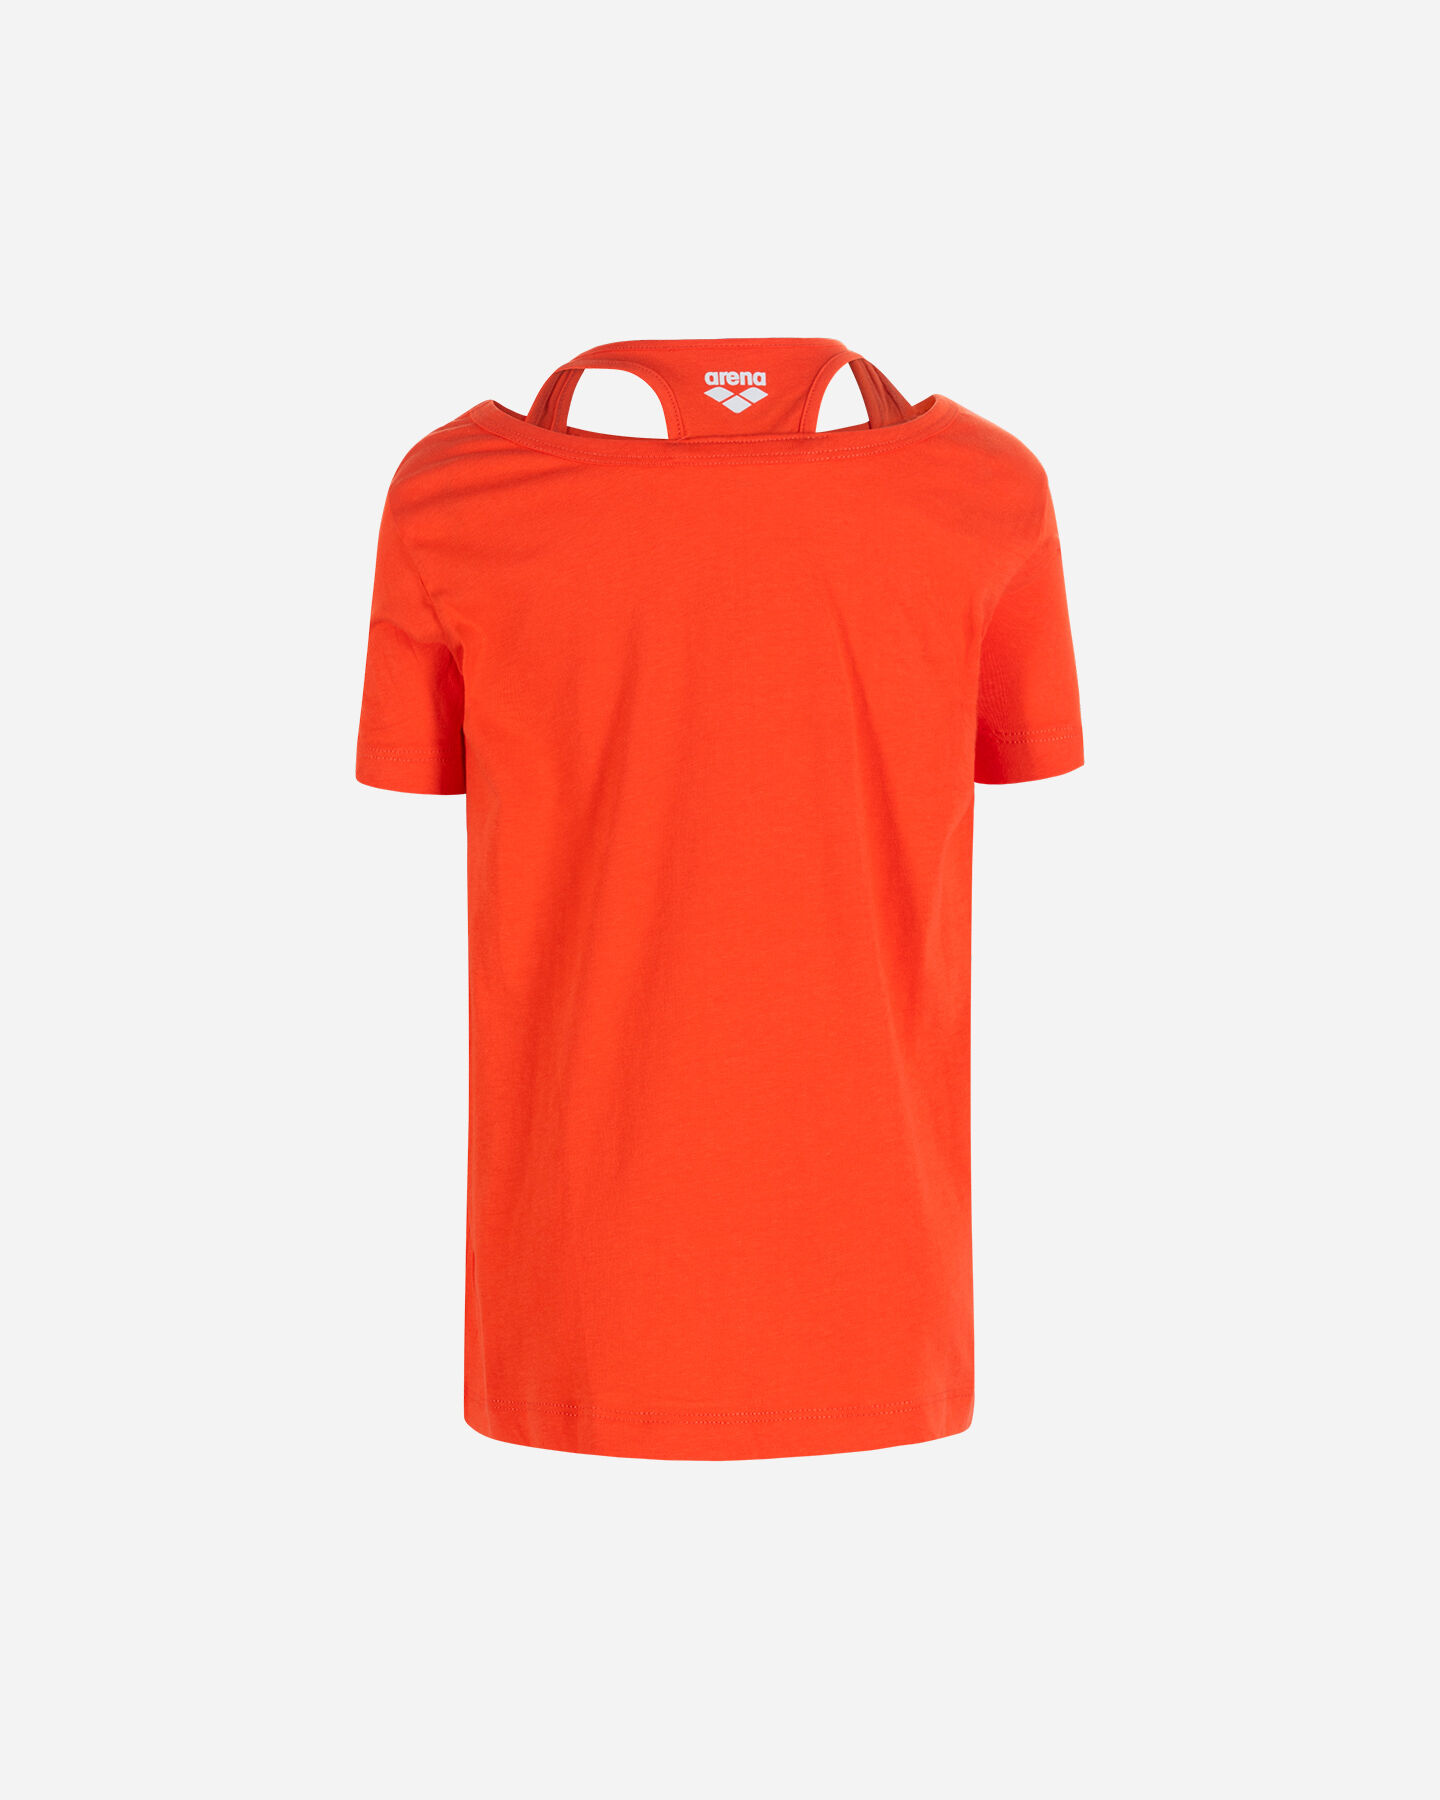  T-Shirt ARENA BASIC ATHLETICS JR S4118976|238|8A scatto 1